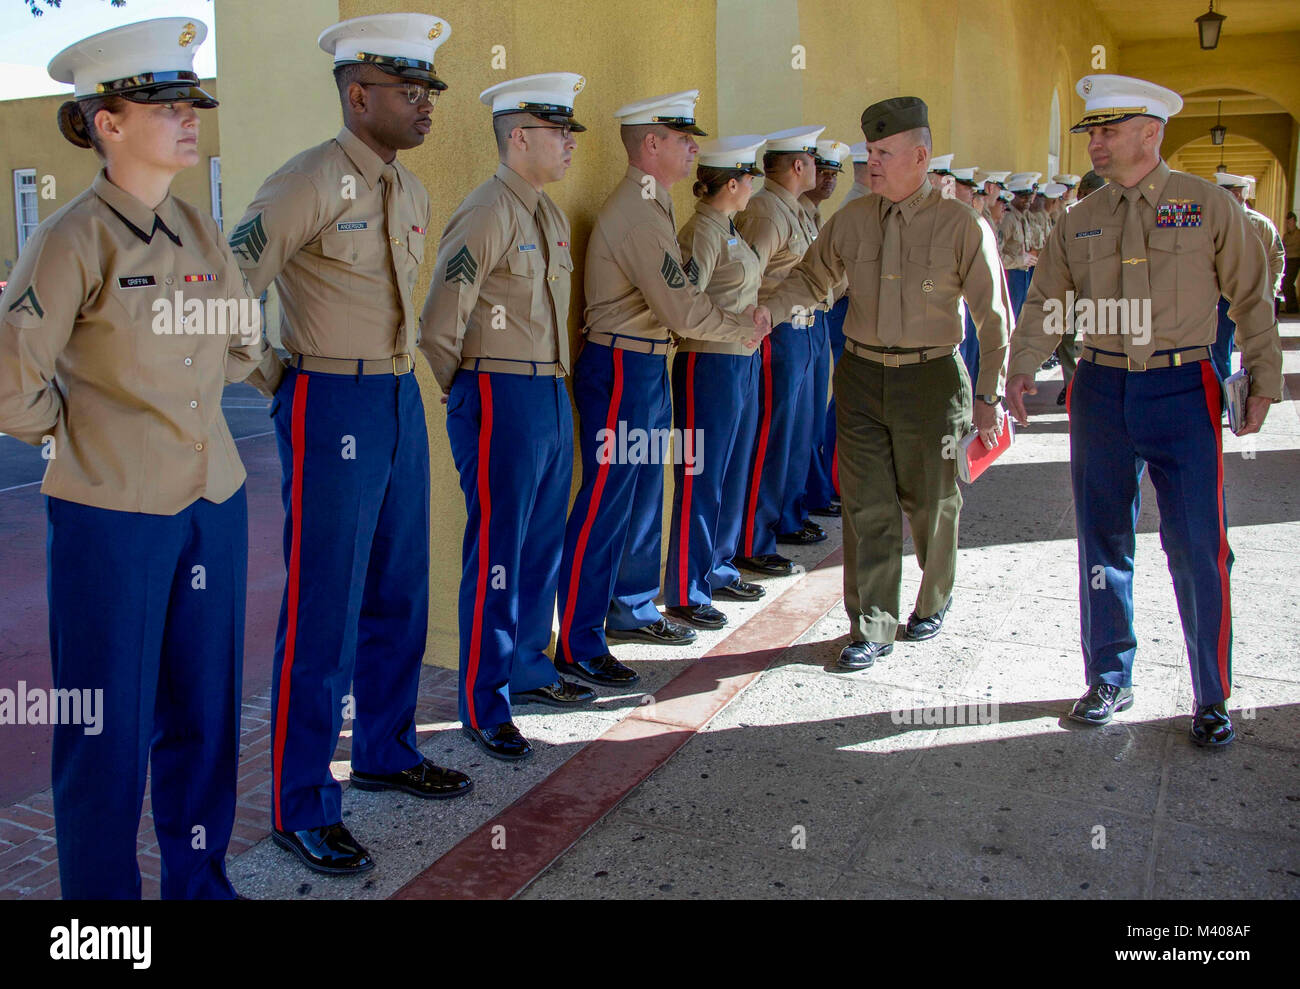 Commandant of the Marine Corps Gen. Robert B. Neller shakes hands with Marines during a visit to Recruiters School aboard Marine Corps Recruit Depot, San Diego, Calif., February 8, 2018. Neller addressed the Marines about his latest Message to the Force: Execute and answers questions. (U.S. Marine Corps photo by Sgt. Olivia G. Ortiz) Stock Photo